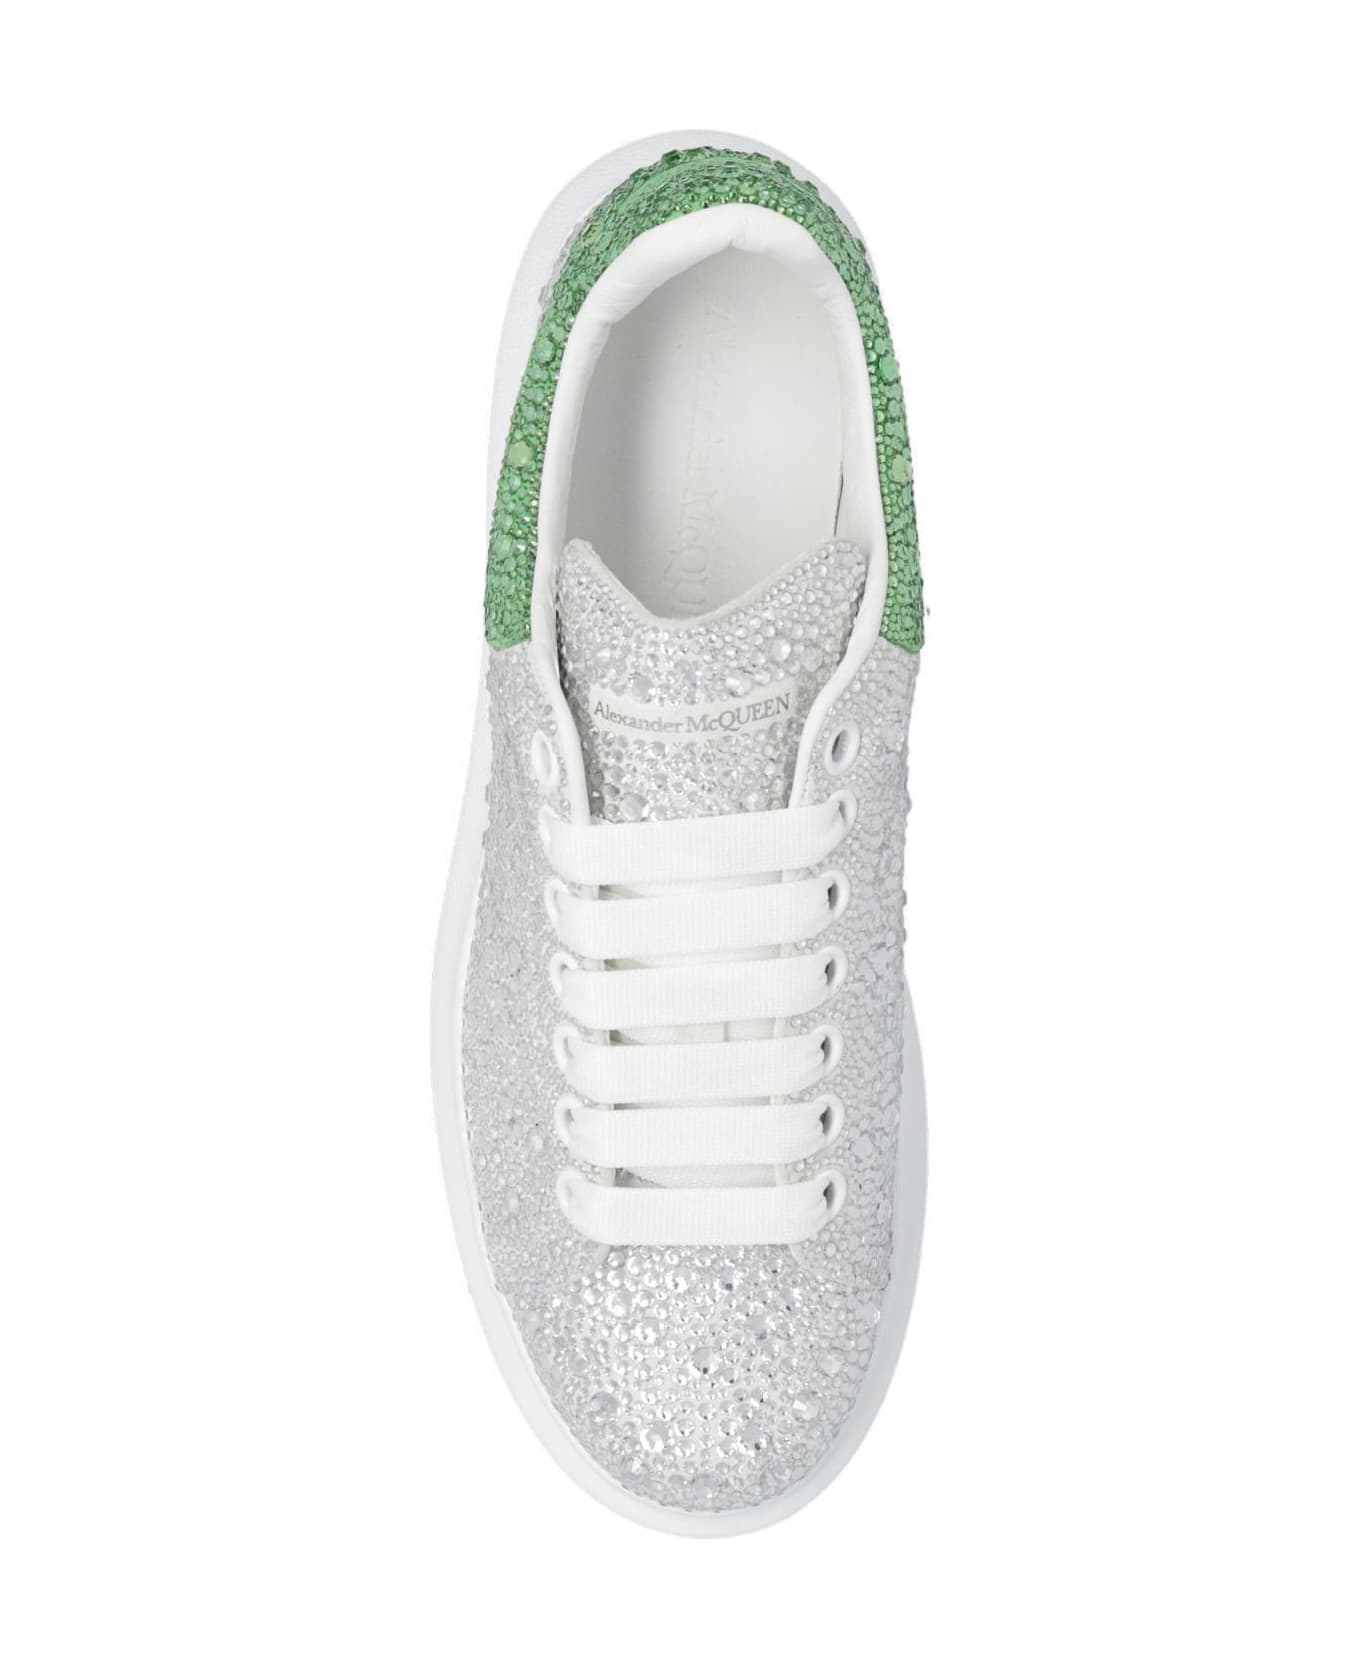 Alexander McQueen Embellished Lace-up Sneakers